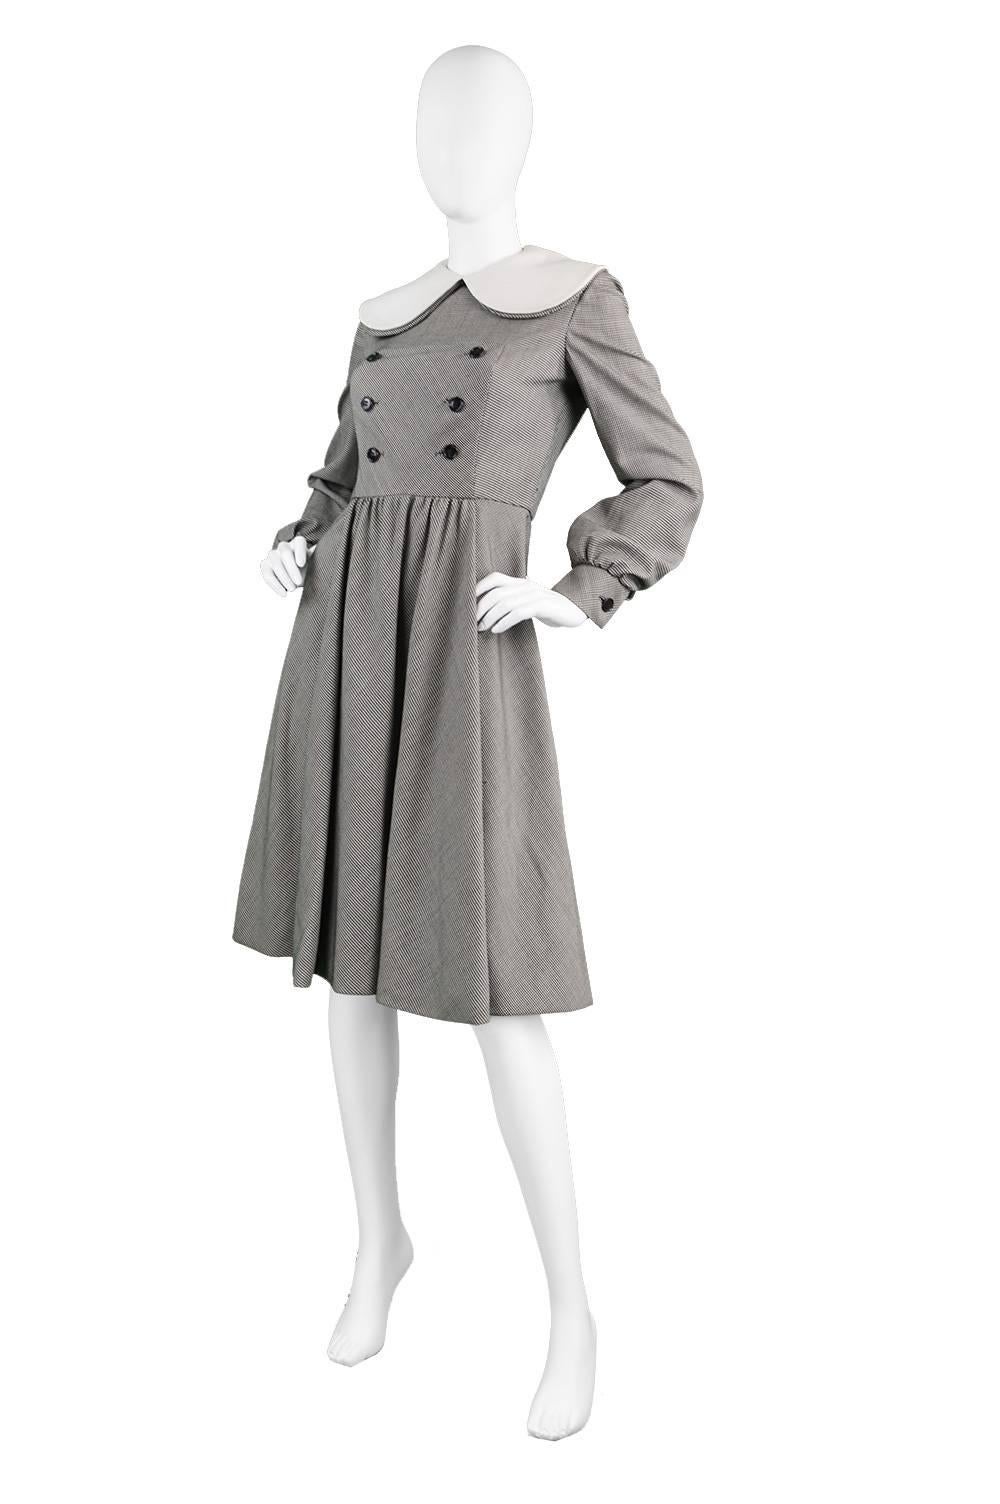 A chic and sophisticated vintage dress by iconic American designer, Geoffrey Beene from the 1970s. In a quality wool fabric with a micro houndstooth check and incredible drape and a white linen peter pan collar. Known for his simple and timeless